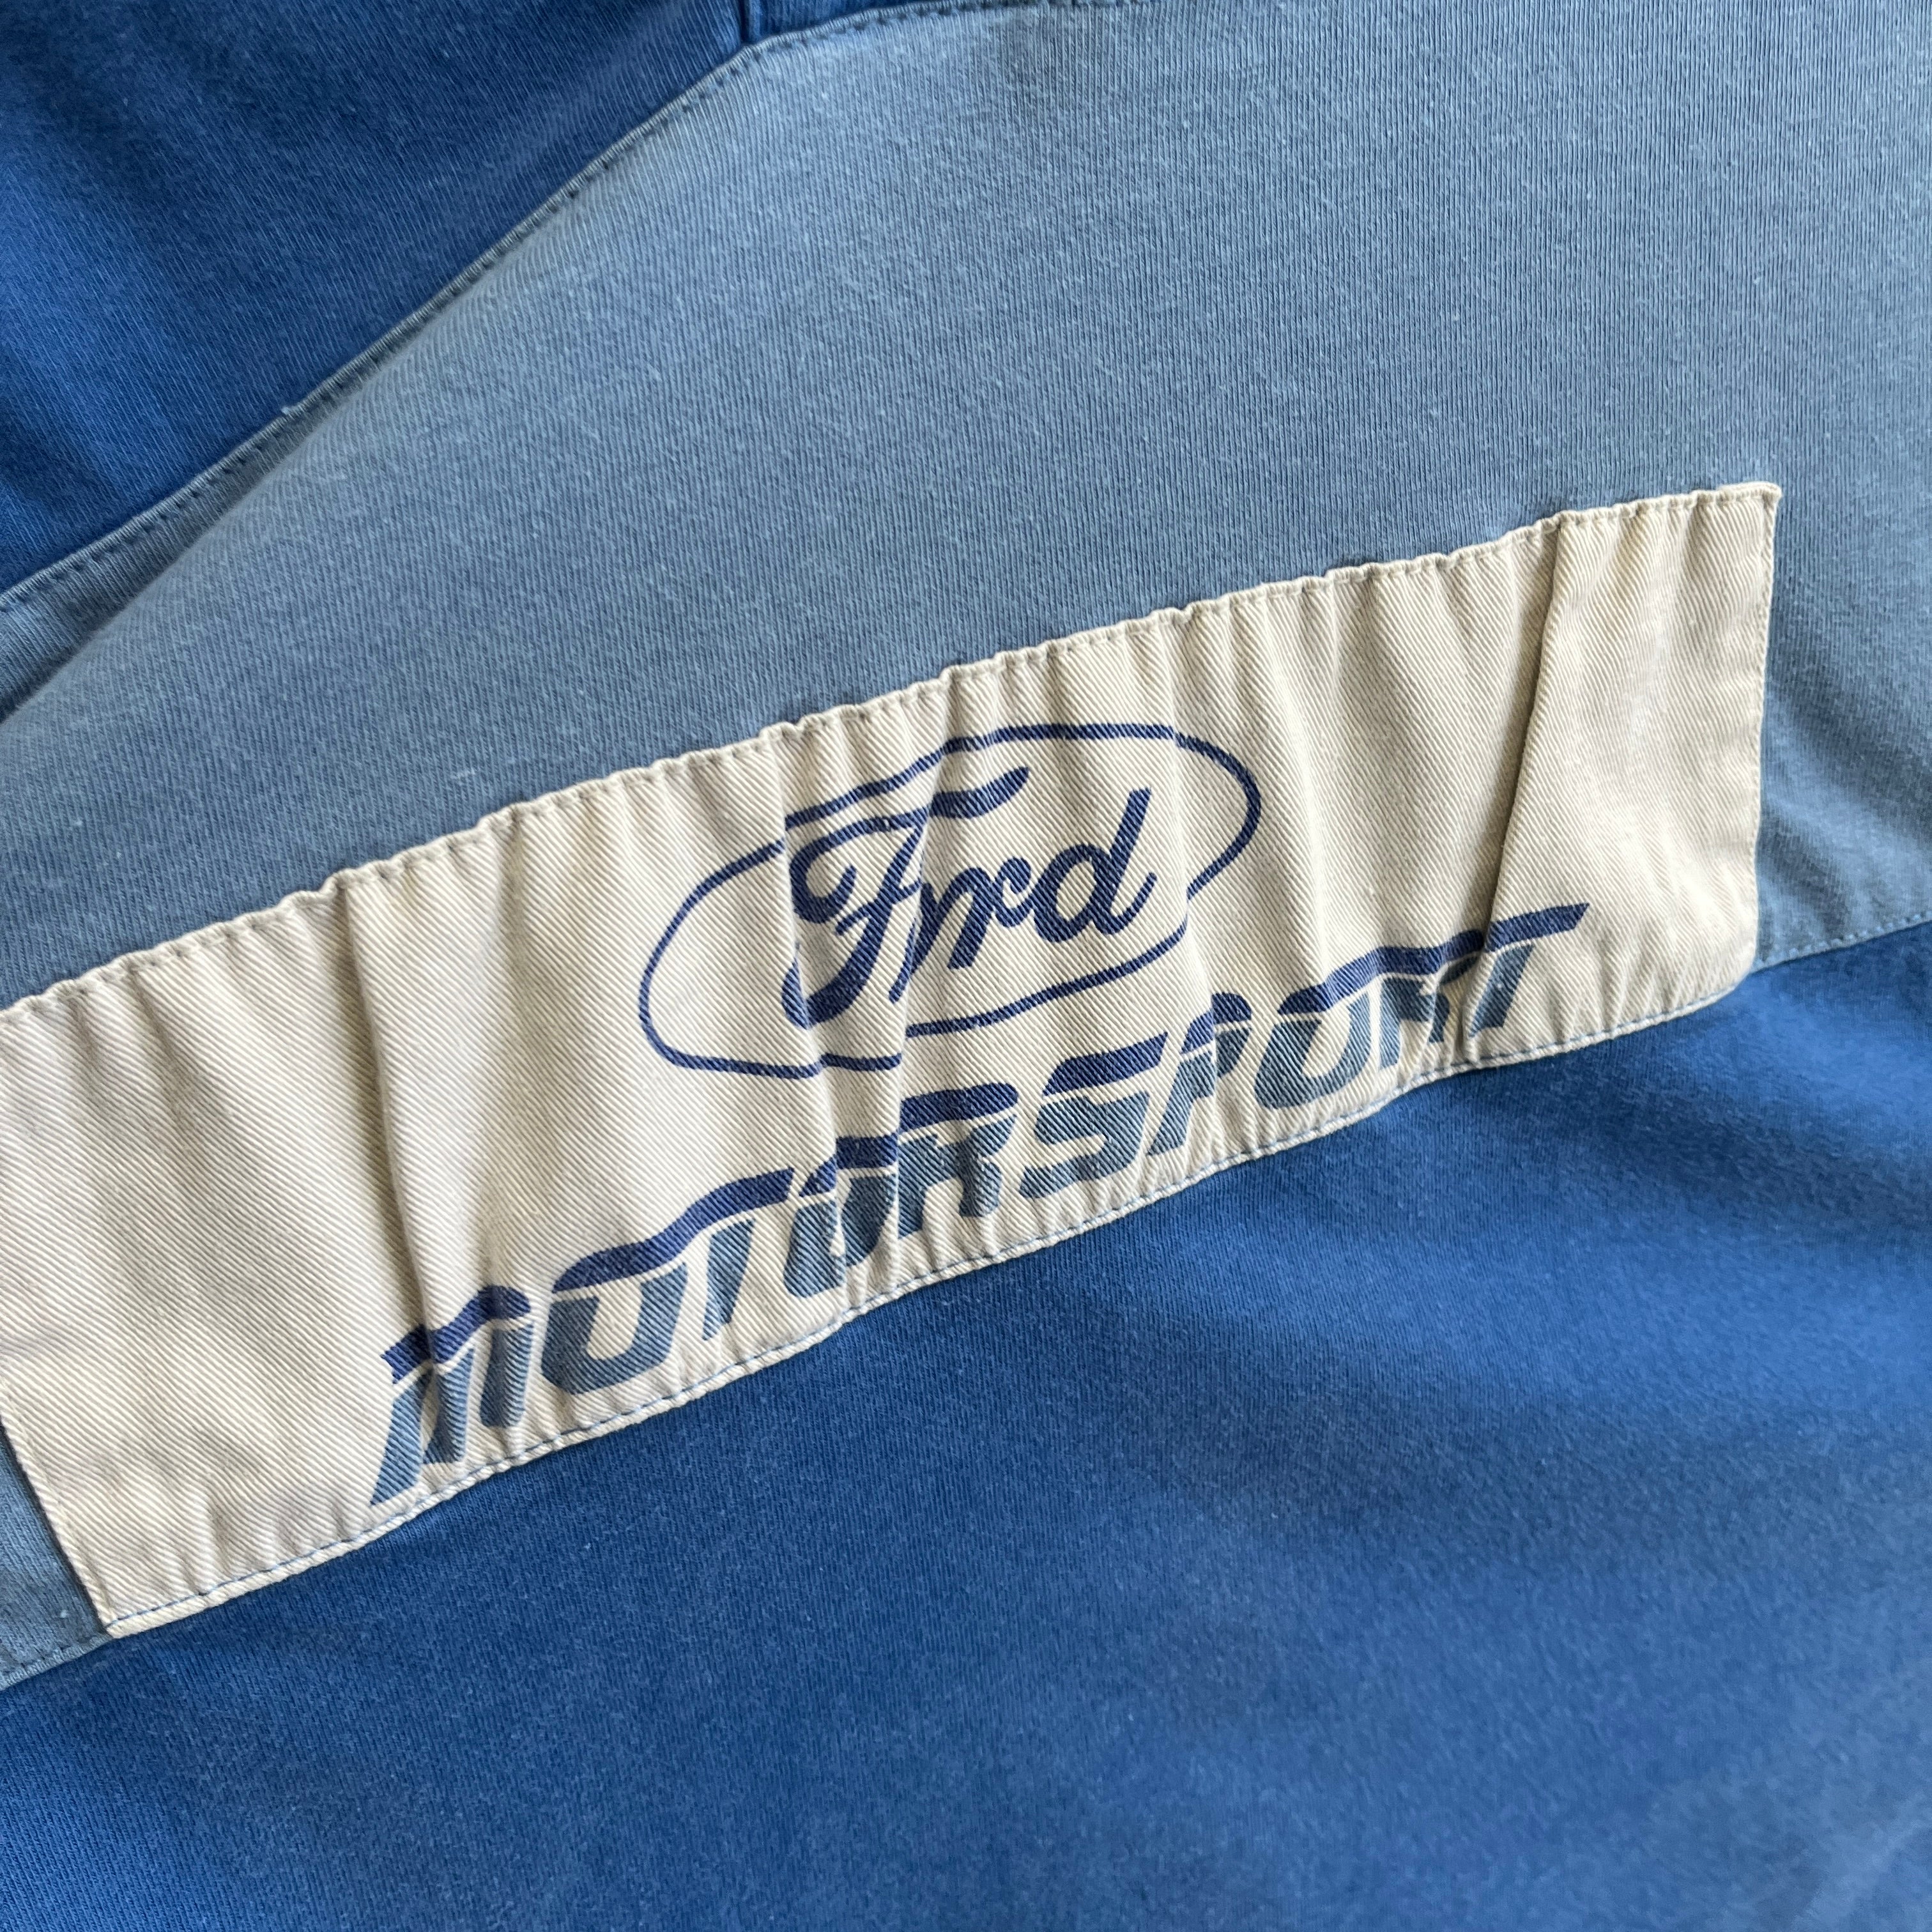 1980/90s Ford Rugby Shirt That Has Seen Better Days